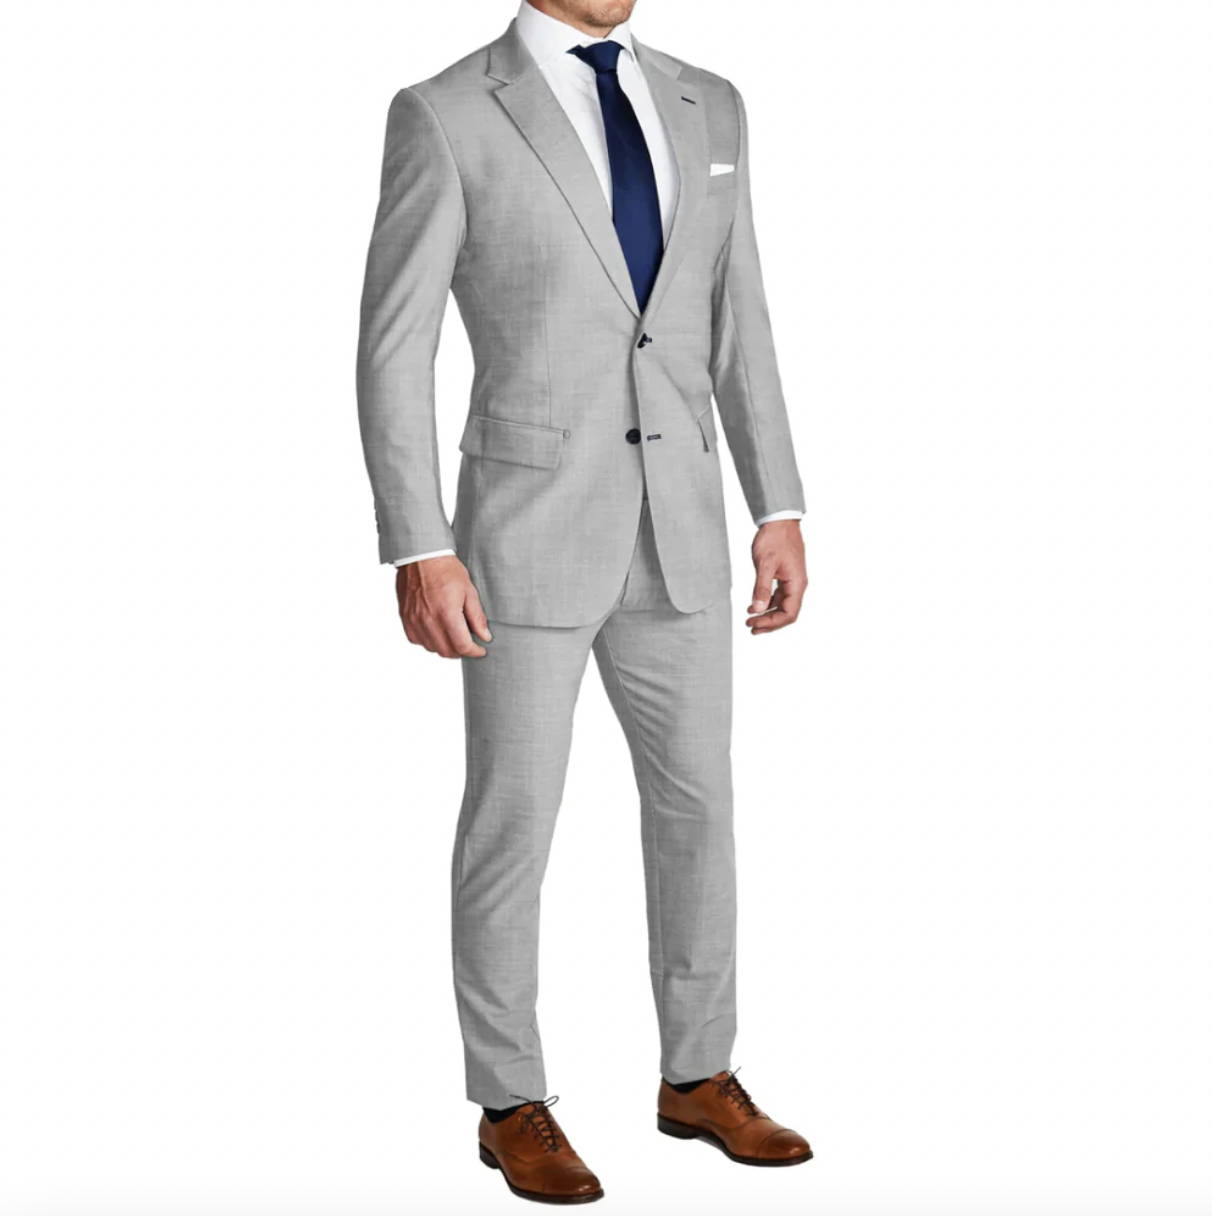 Custom Suits in New York City - State & Liberty NYC